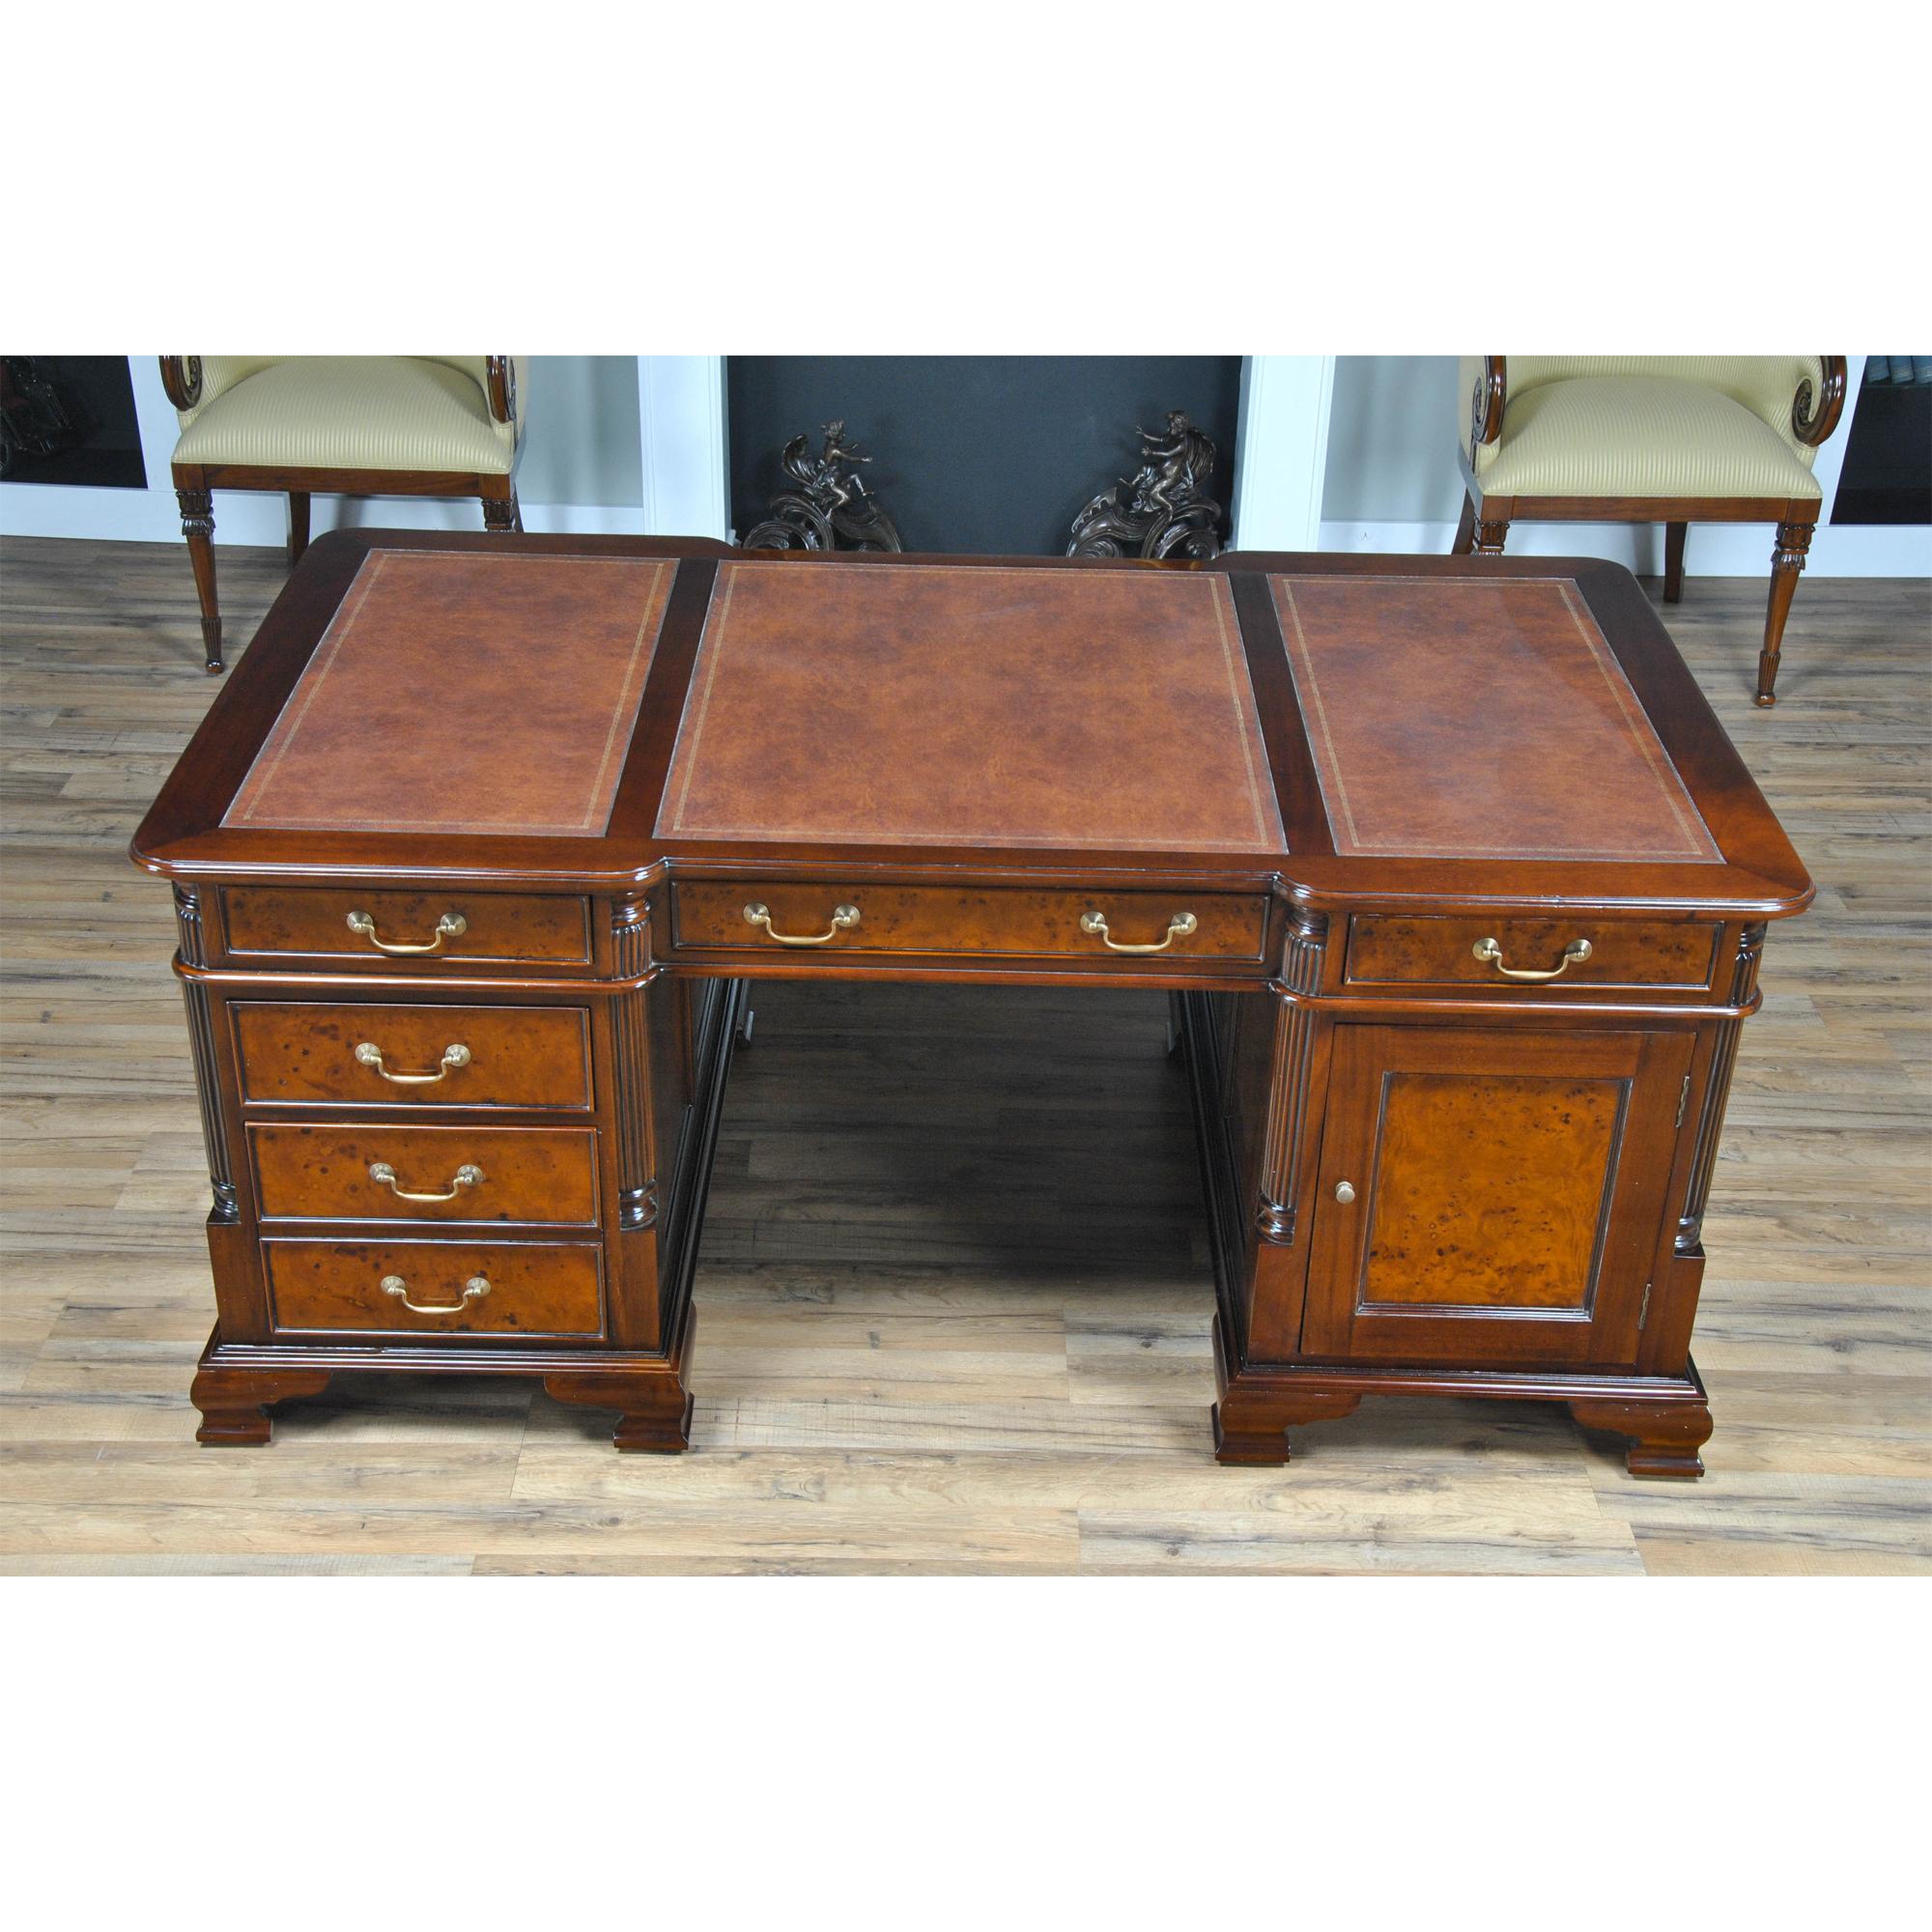 This beautiful burled partners desk by Niagara Furniture is crafted as an antique reproduction. The fine quality veneers in the drawer and door panels displays a rich color similar to that found in English antiques. The three-paneled writing surface